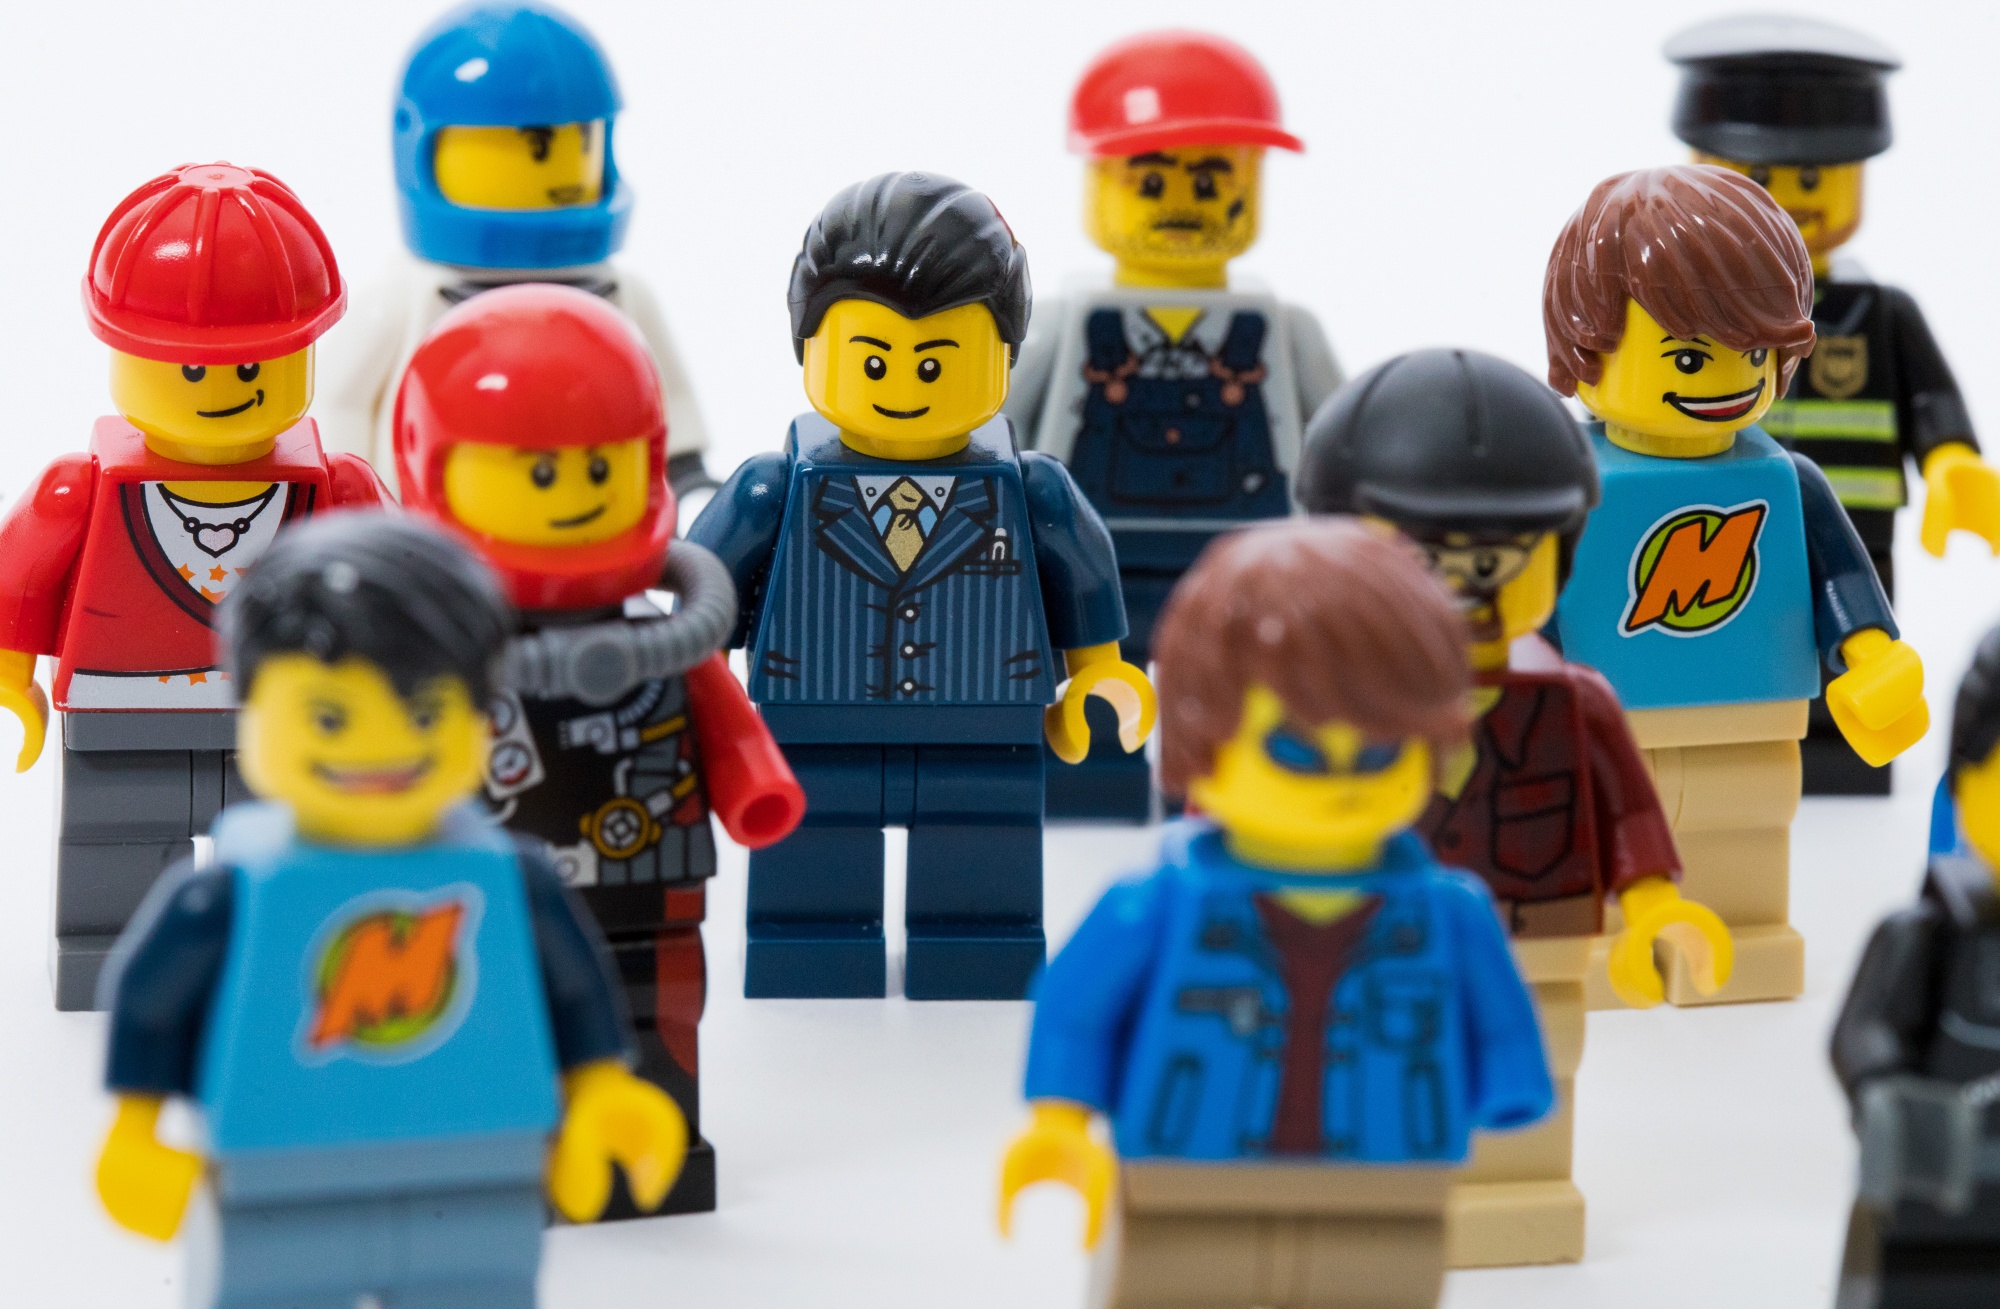 Lego Gives Staff Time Off, Bonuses After Sales Boom in 2021 - Bloomberg